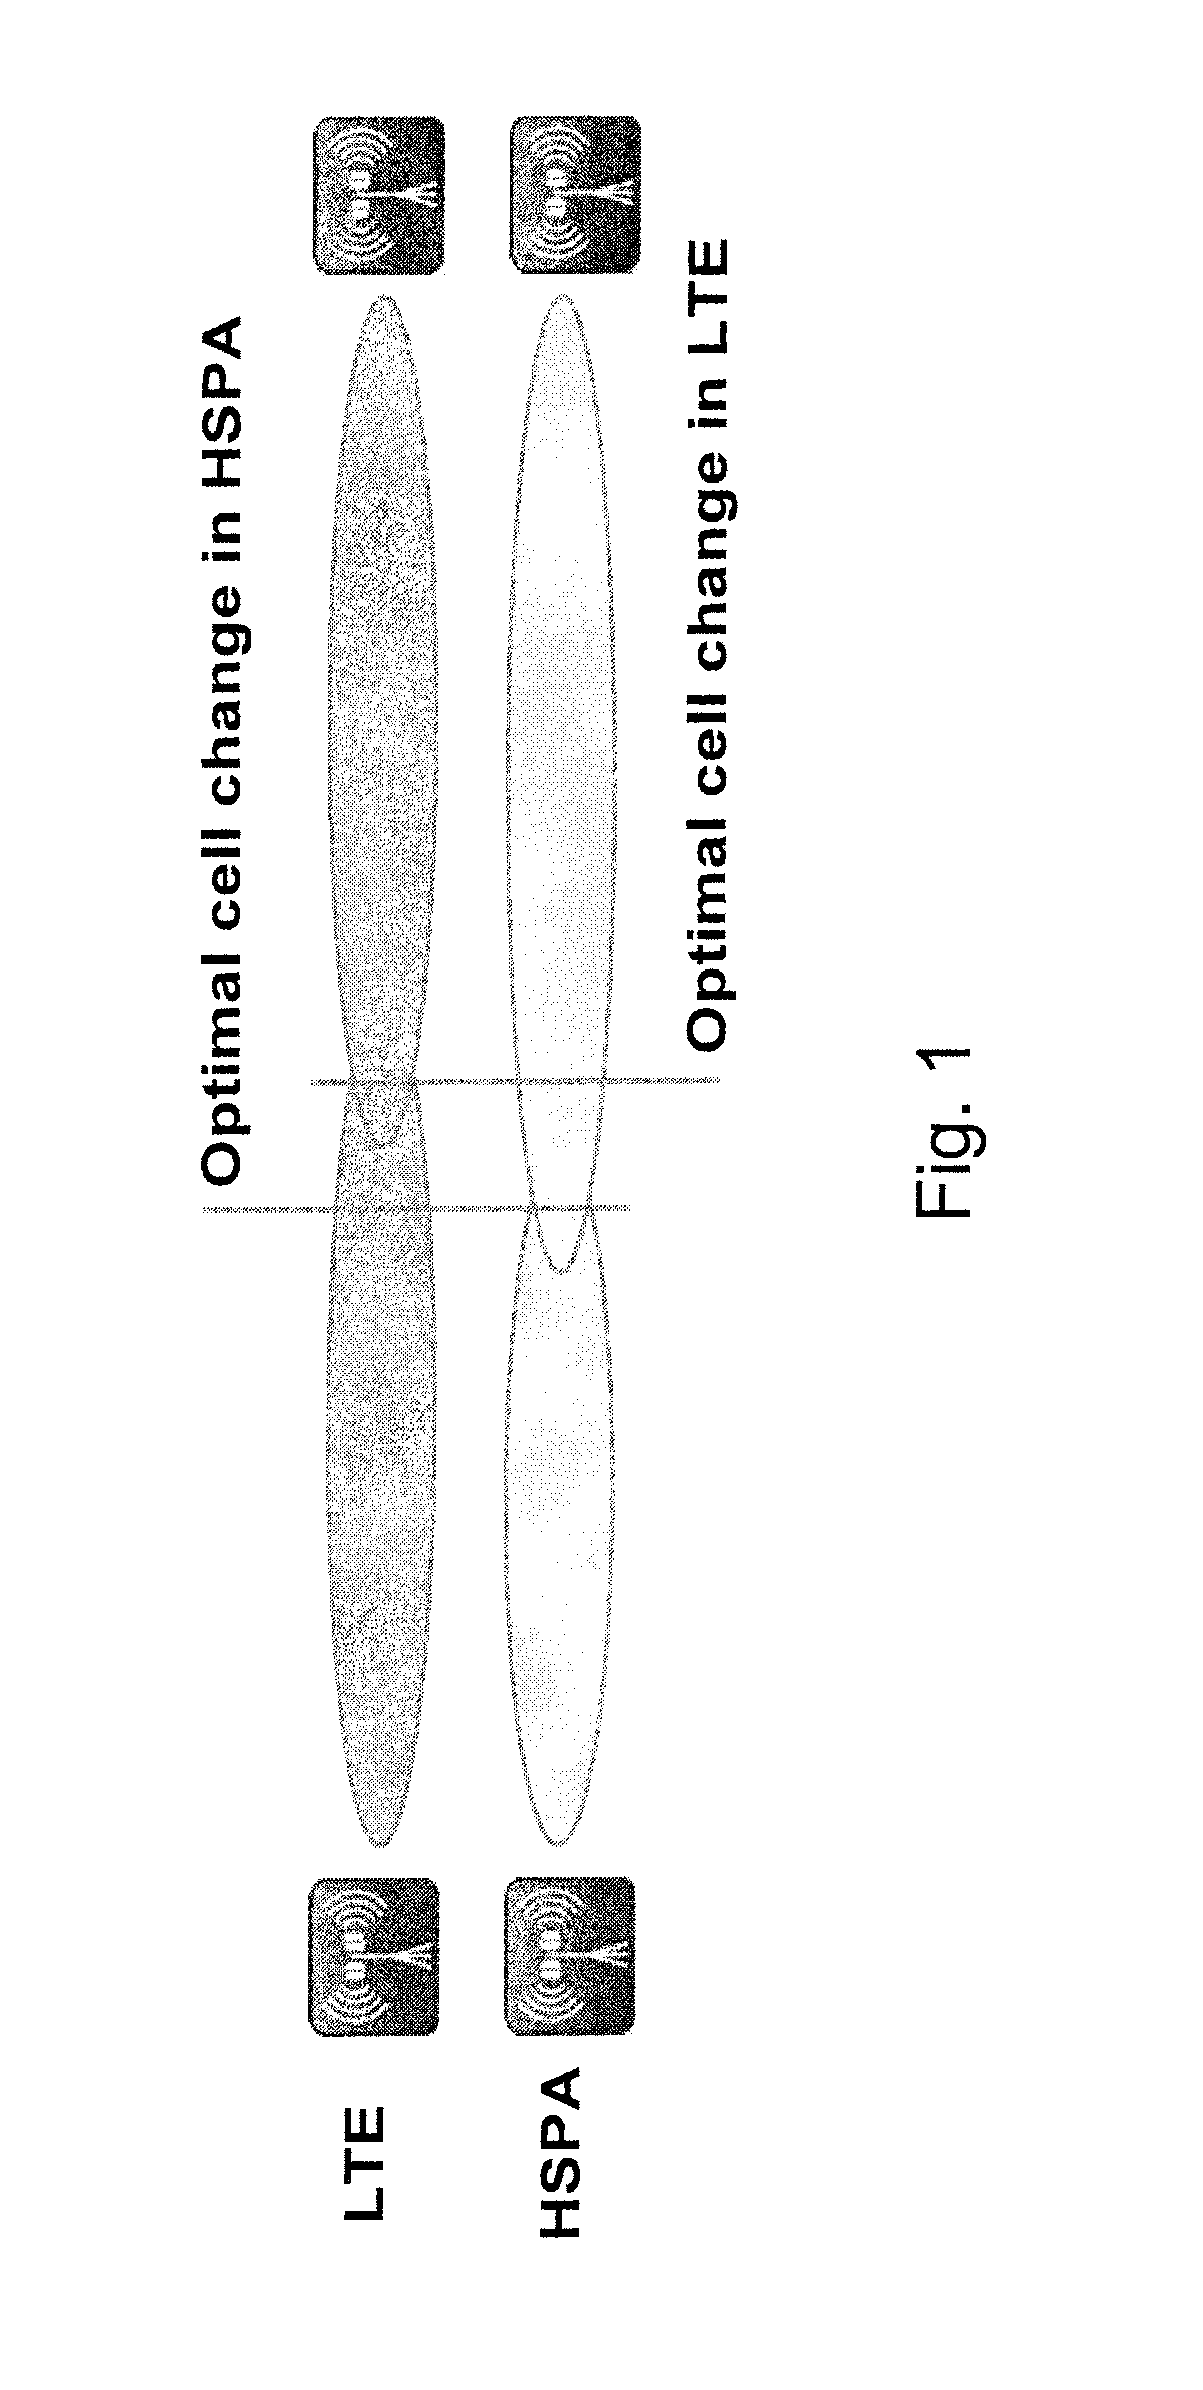 Apparatus and method for inter-radio access technology carrier aggregation mobility enhancement